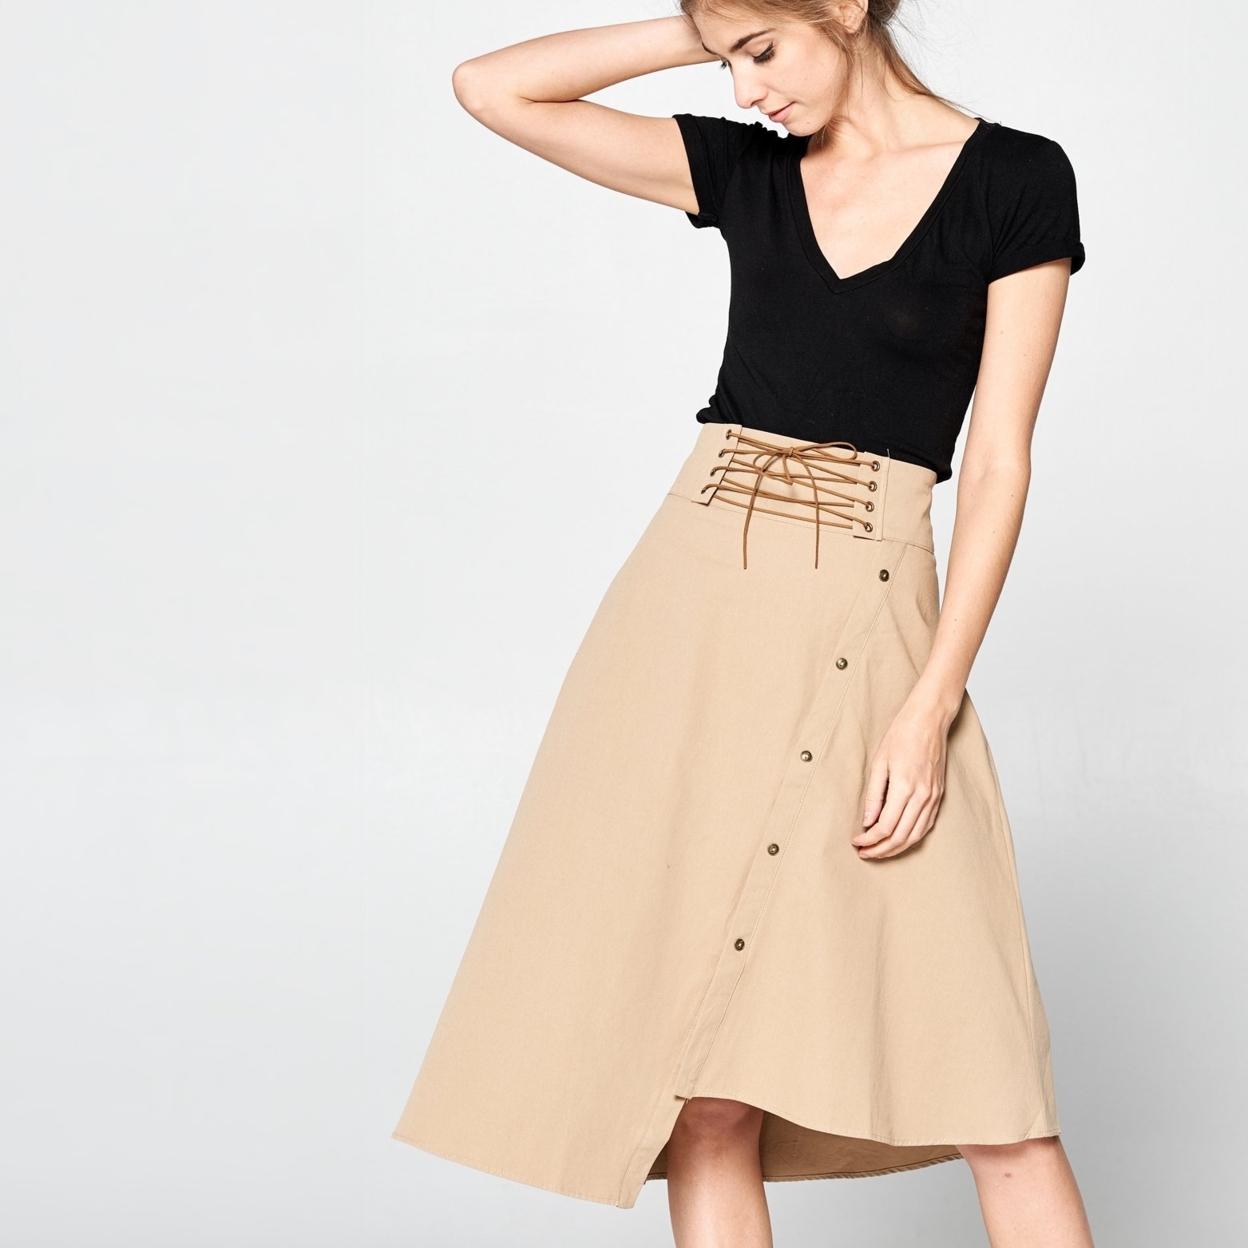 Uneven Cotton Twill Skirt - Taupe, Large (12-14)